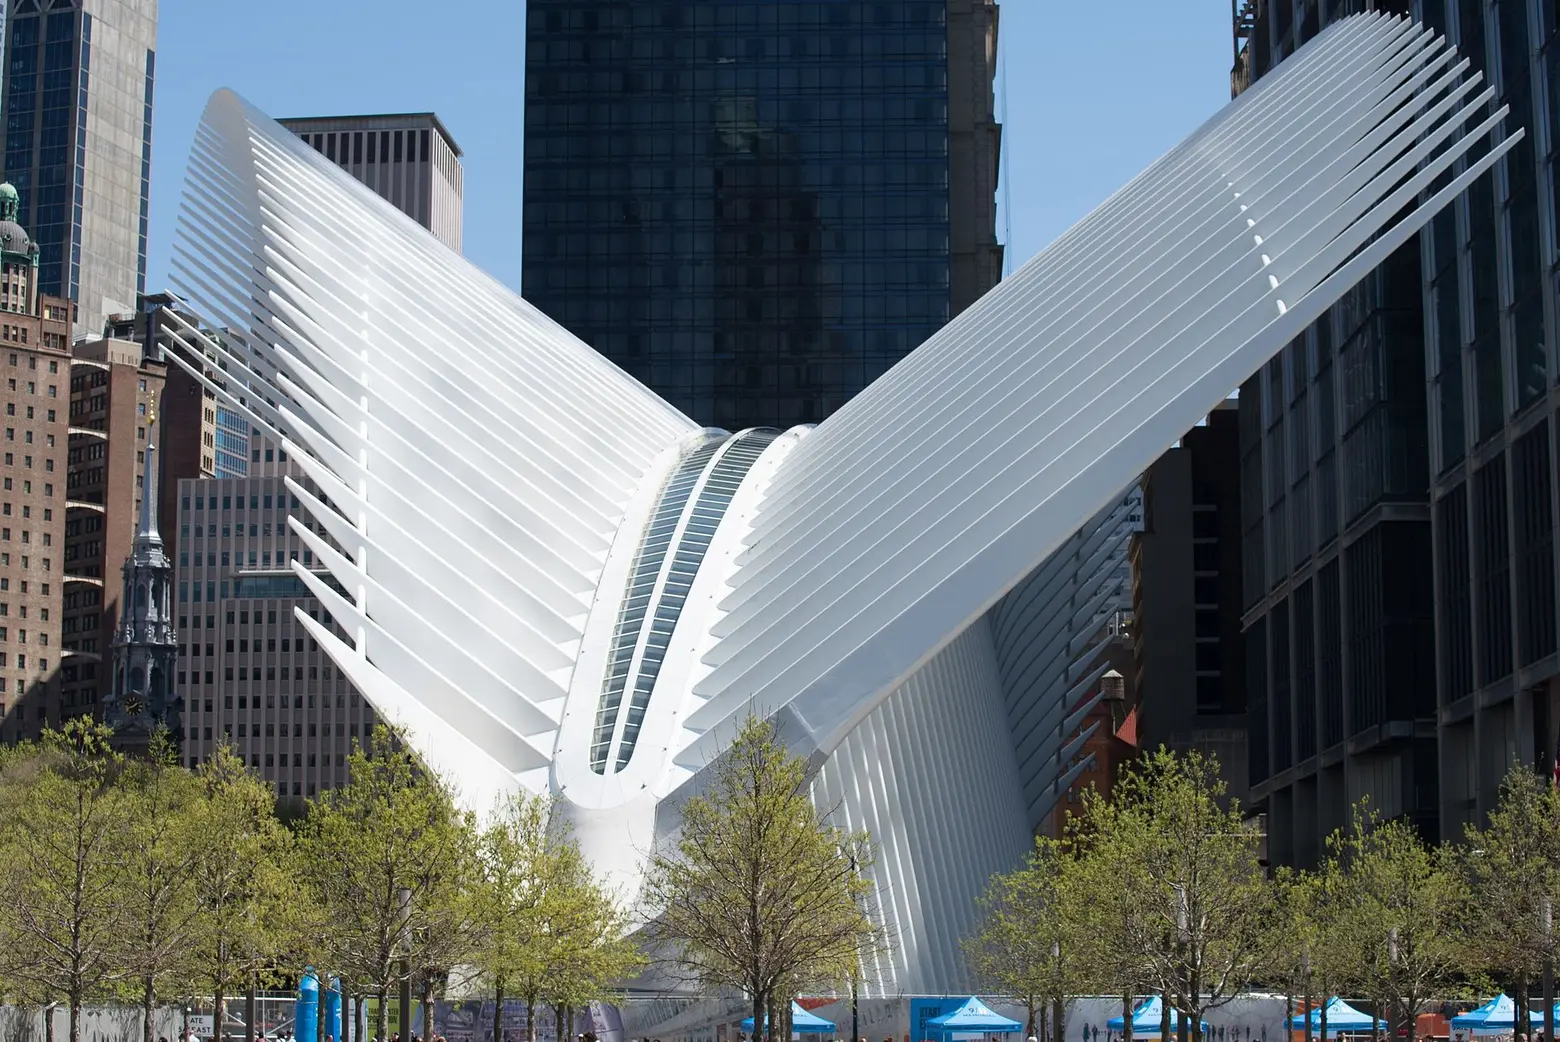 Leaking skylight of World Trade Center’s Oculus may not be fixed for 9/11 anniversary